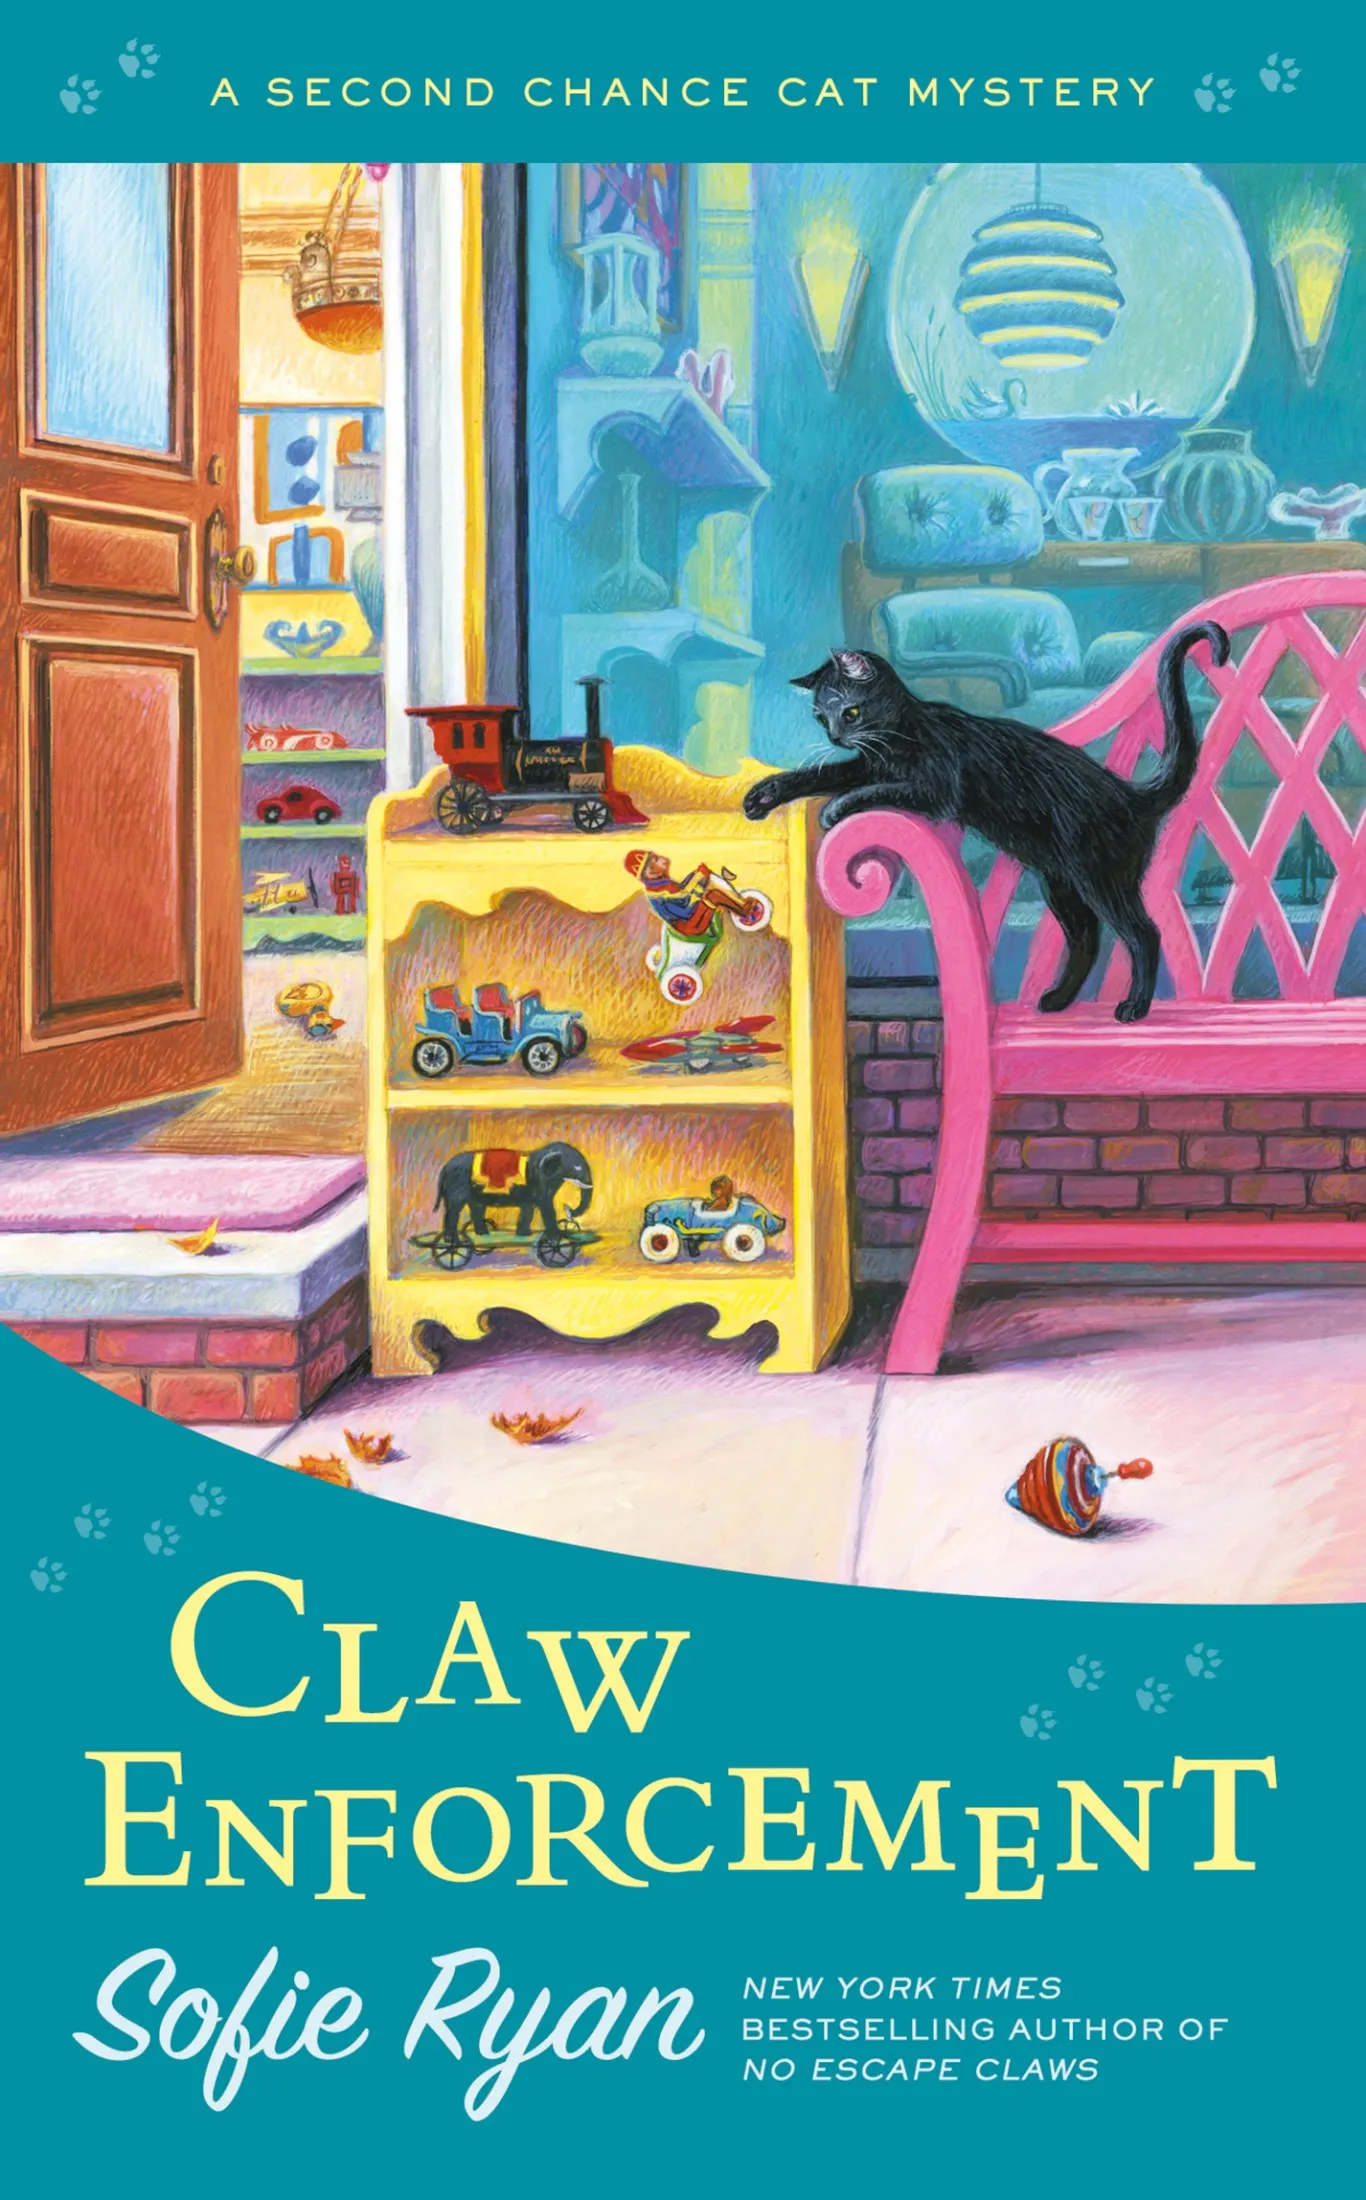 Claw Enforcement (Second Chance Cat Mystery #7)